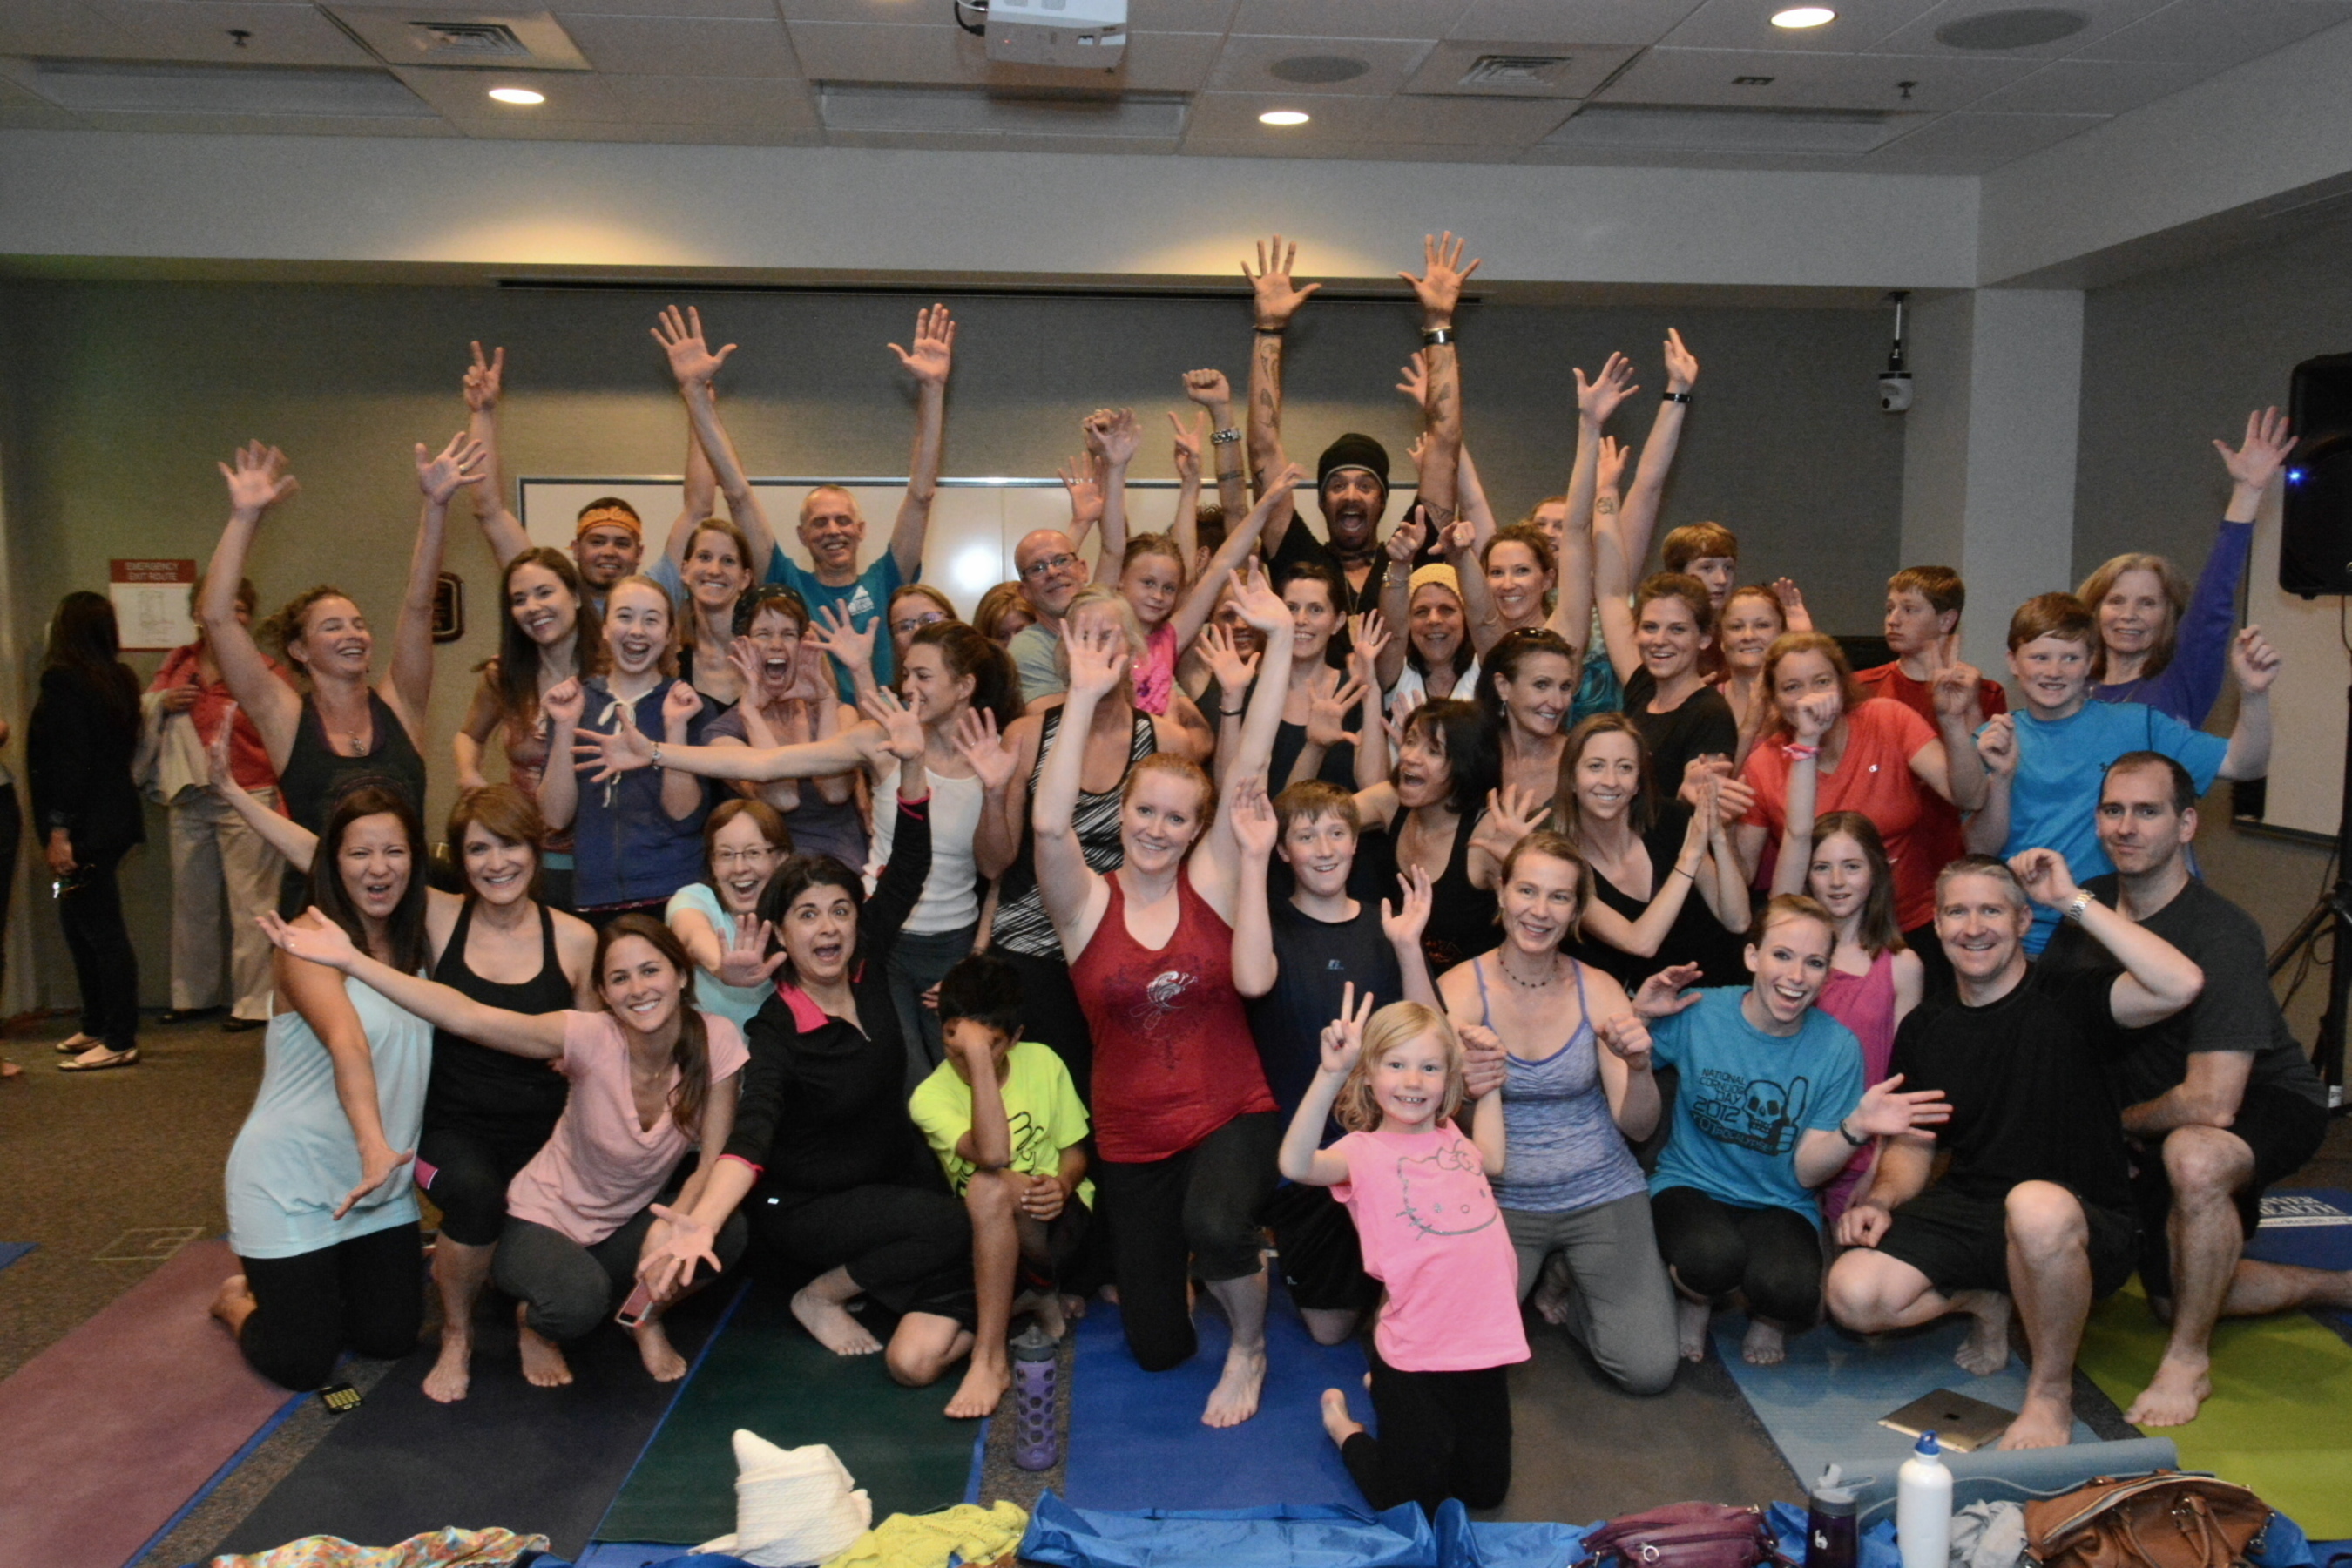 Life was better today thanks to a special visit from Michael Franti. The singer-songwriter, humanitarian, and child author visited Denver Health to do yoga with Denver Health employees before performing at the Denver Health Nightshine Gala, April 26. (PRNewsFoto/Denver Health)